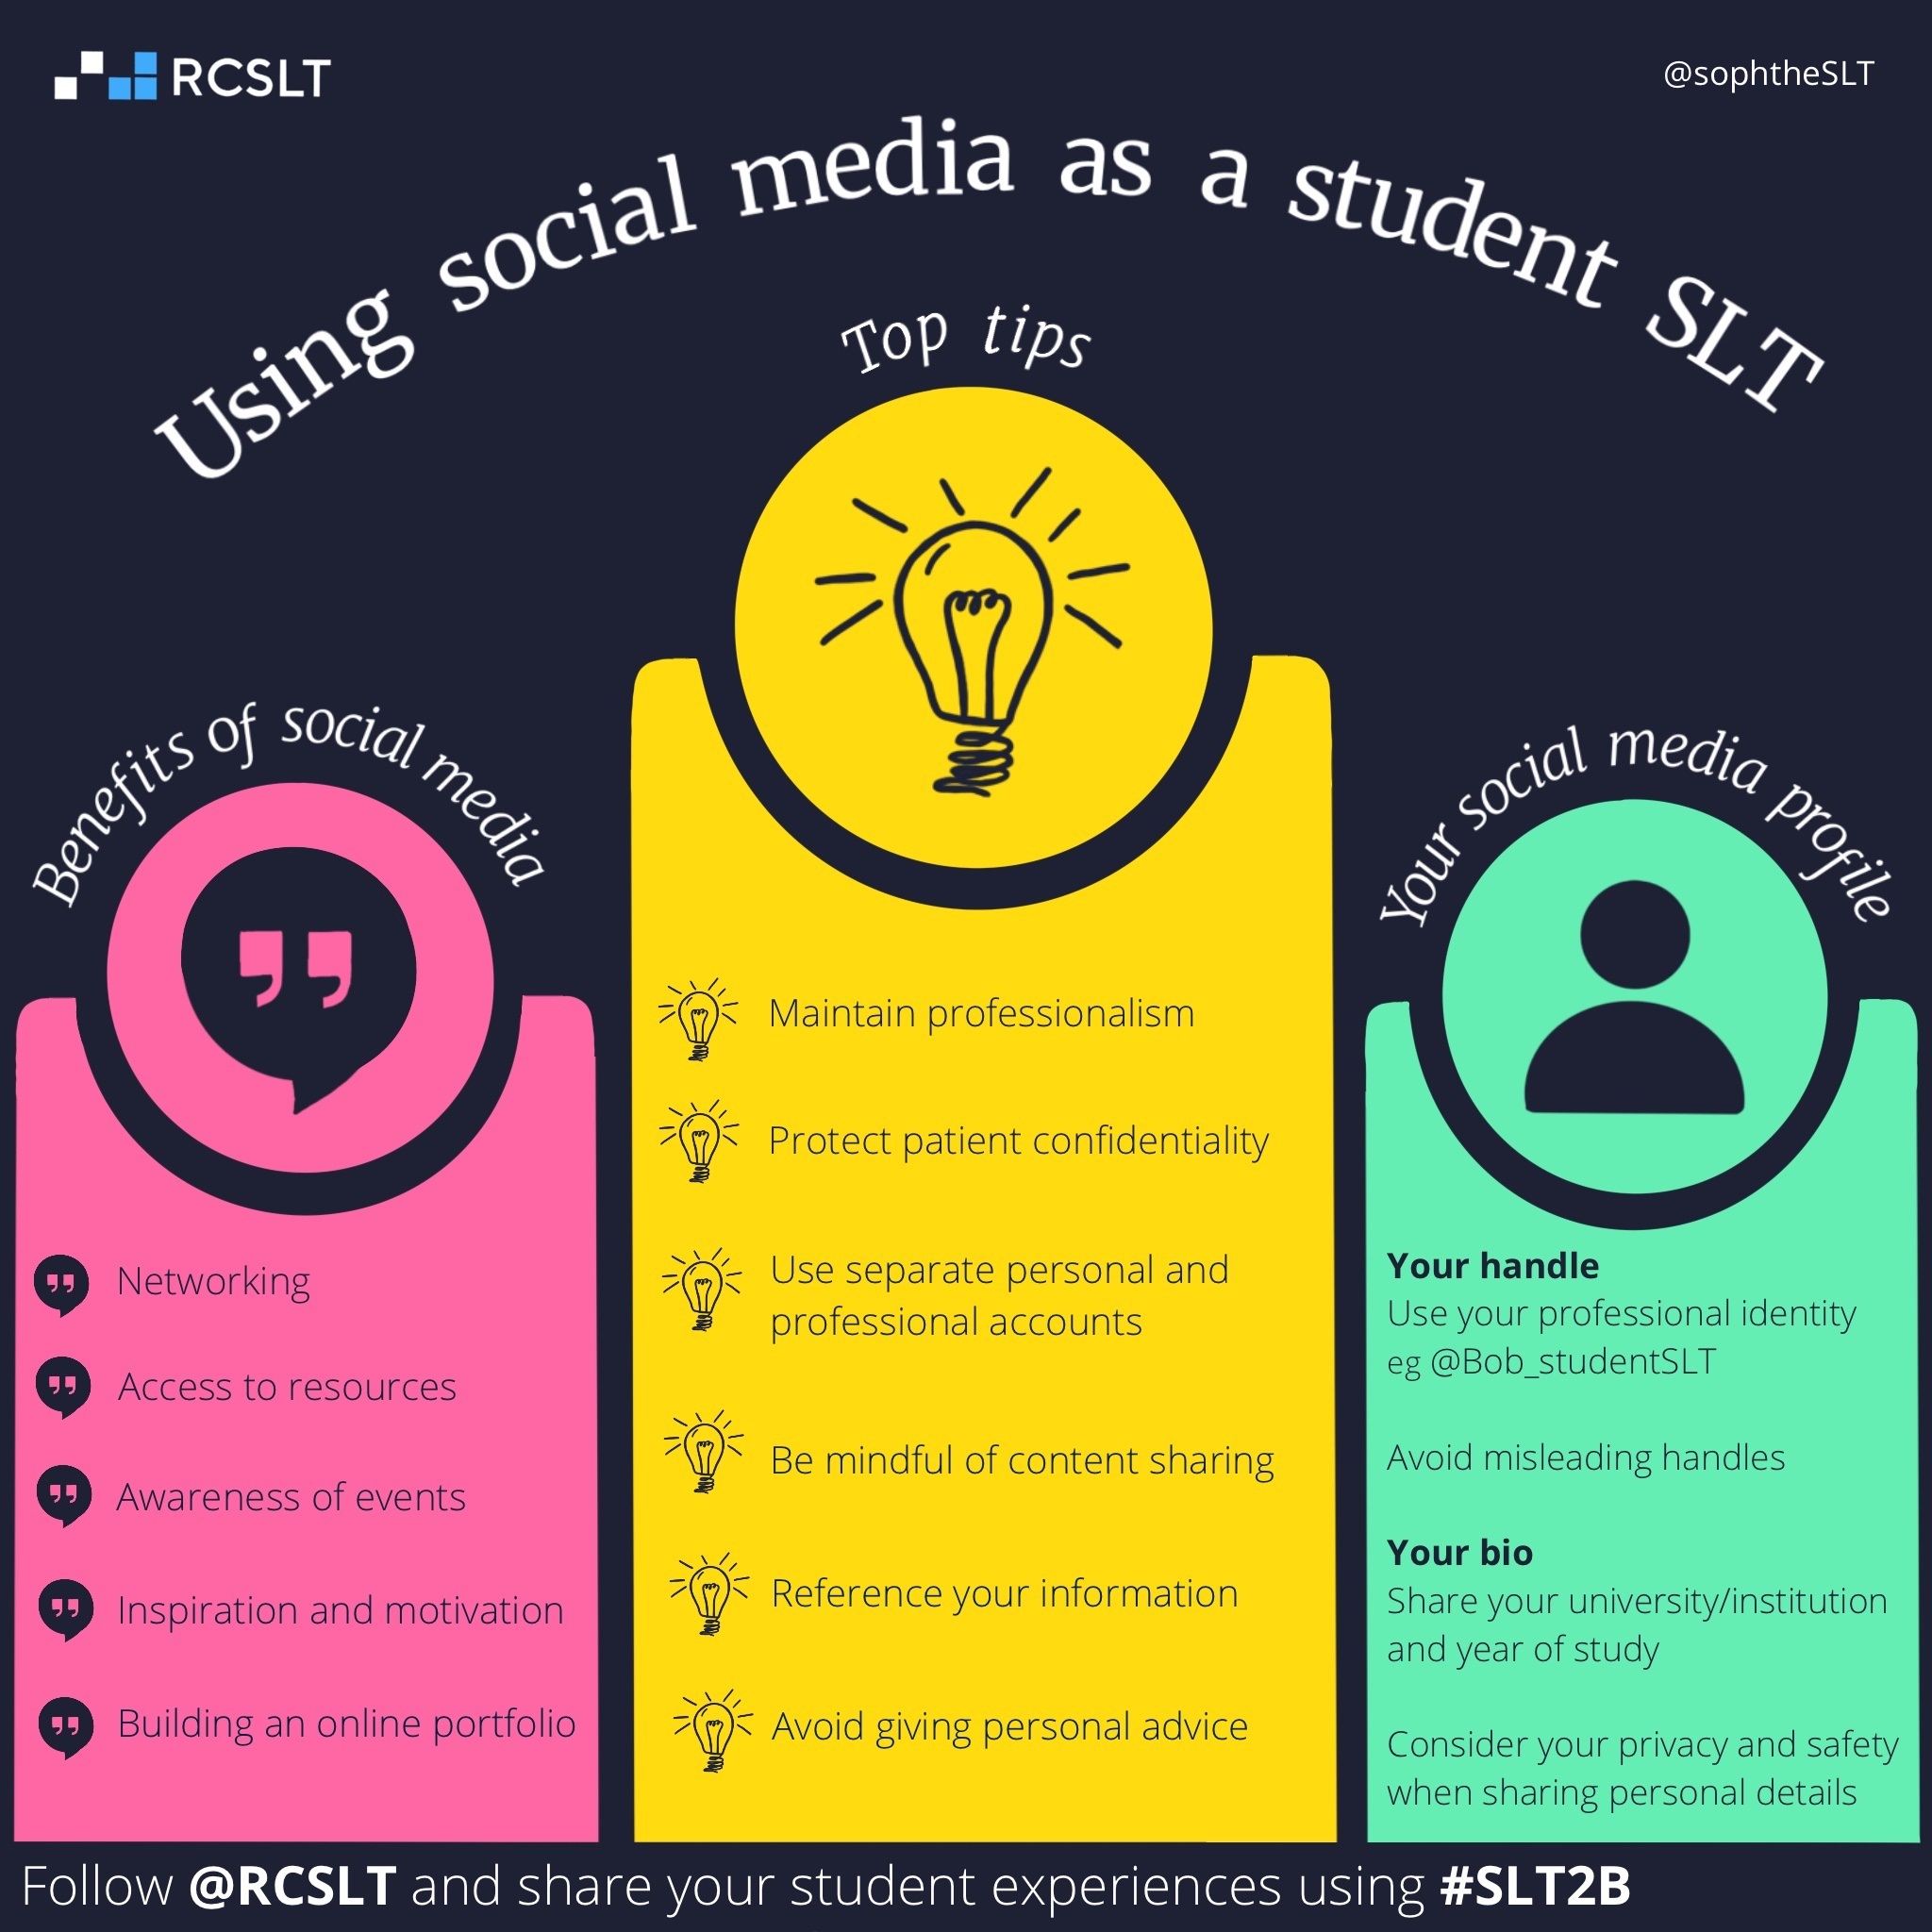 A square infographic with a dark blue background with the title ‘Using social media as a student SLT’. There are three coloured blocks with text under the subheadings ‘benefits of social media’, ‘top tips’ and ‘your social media profile’. The full text and further information can be found on https://www.rcslt.org/members/your-career/students/ 